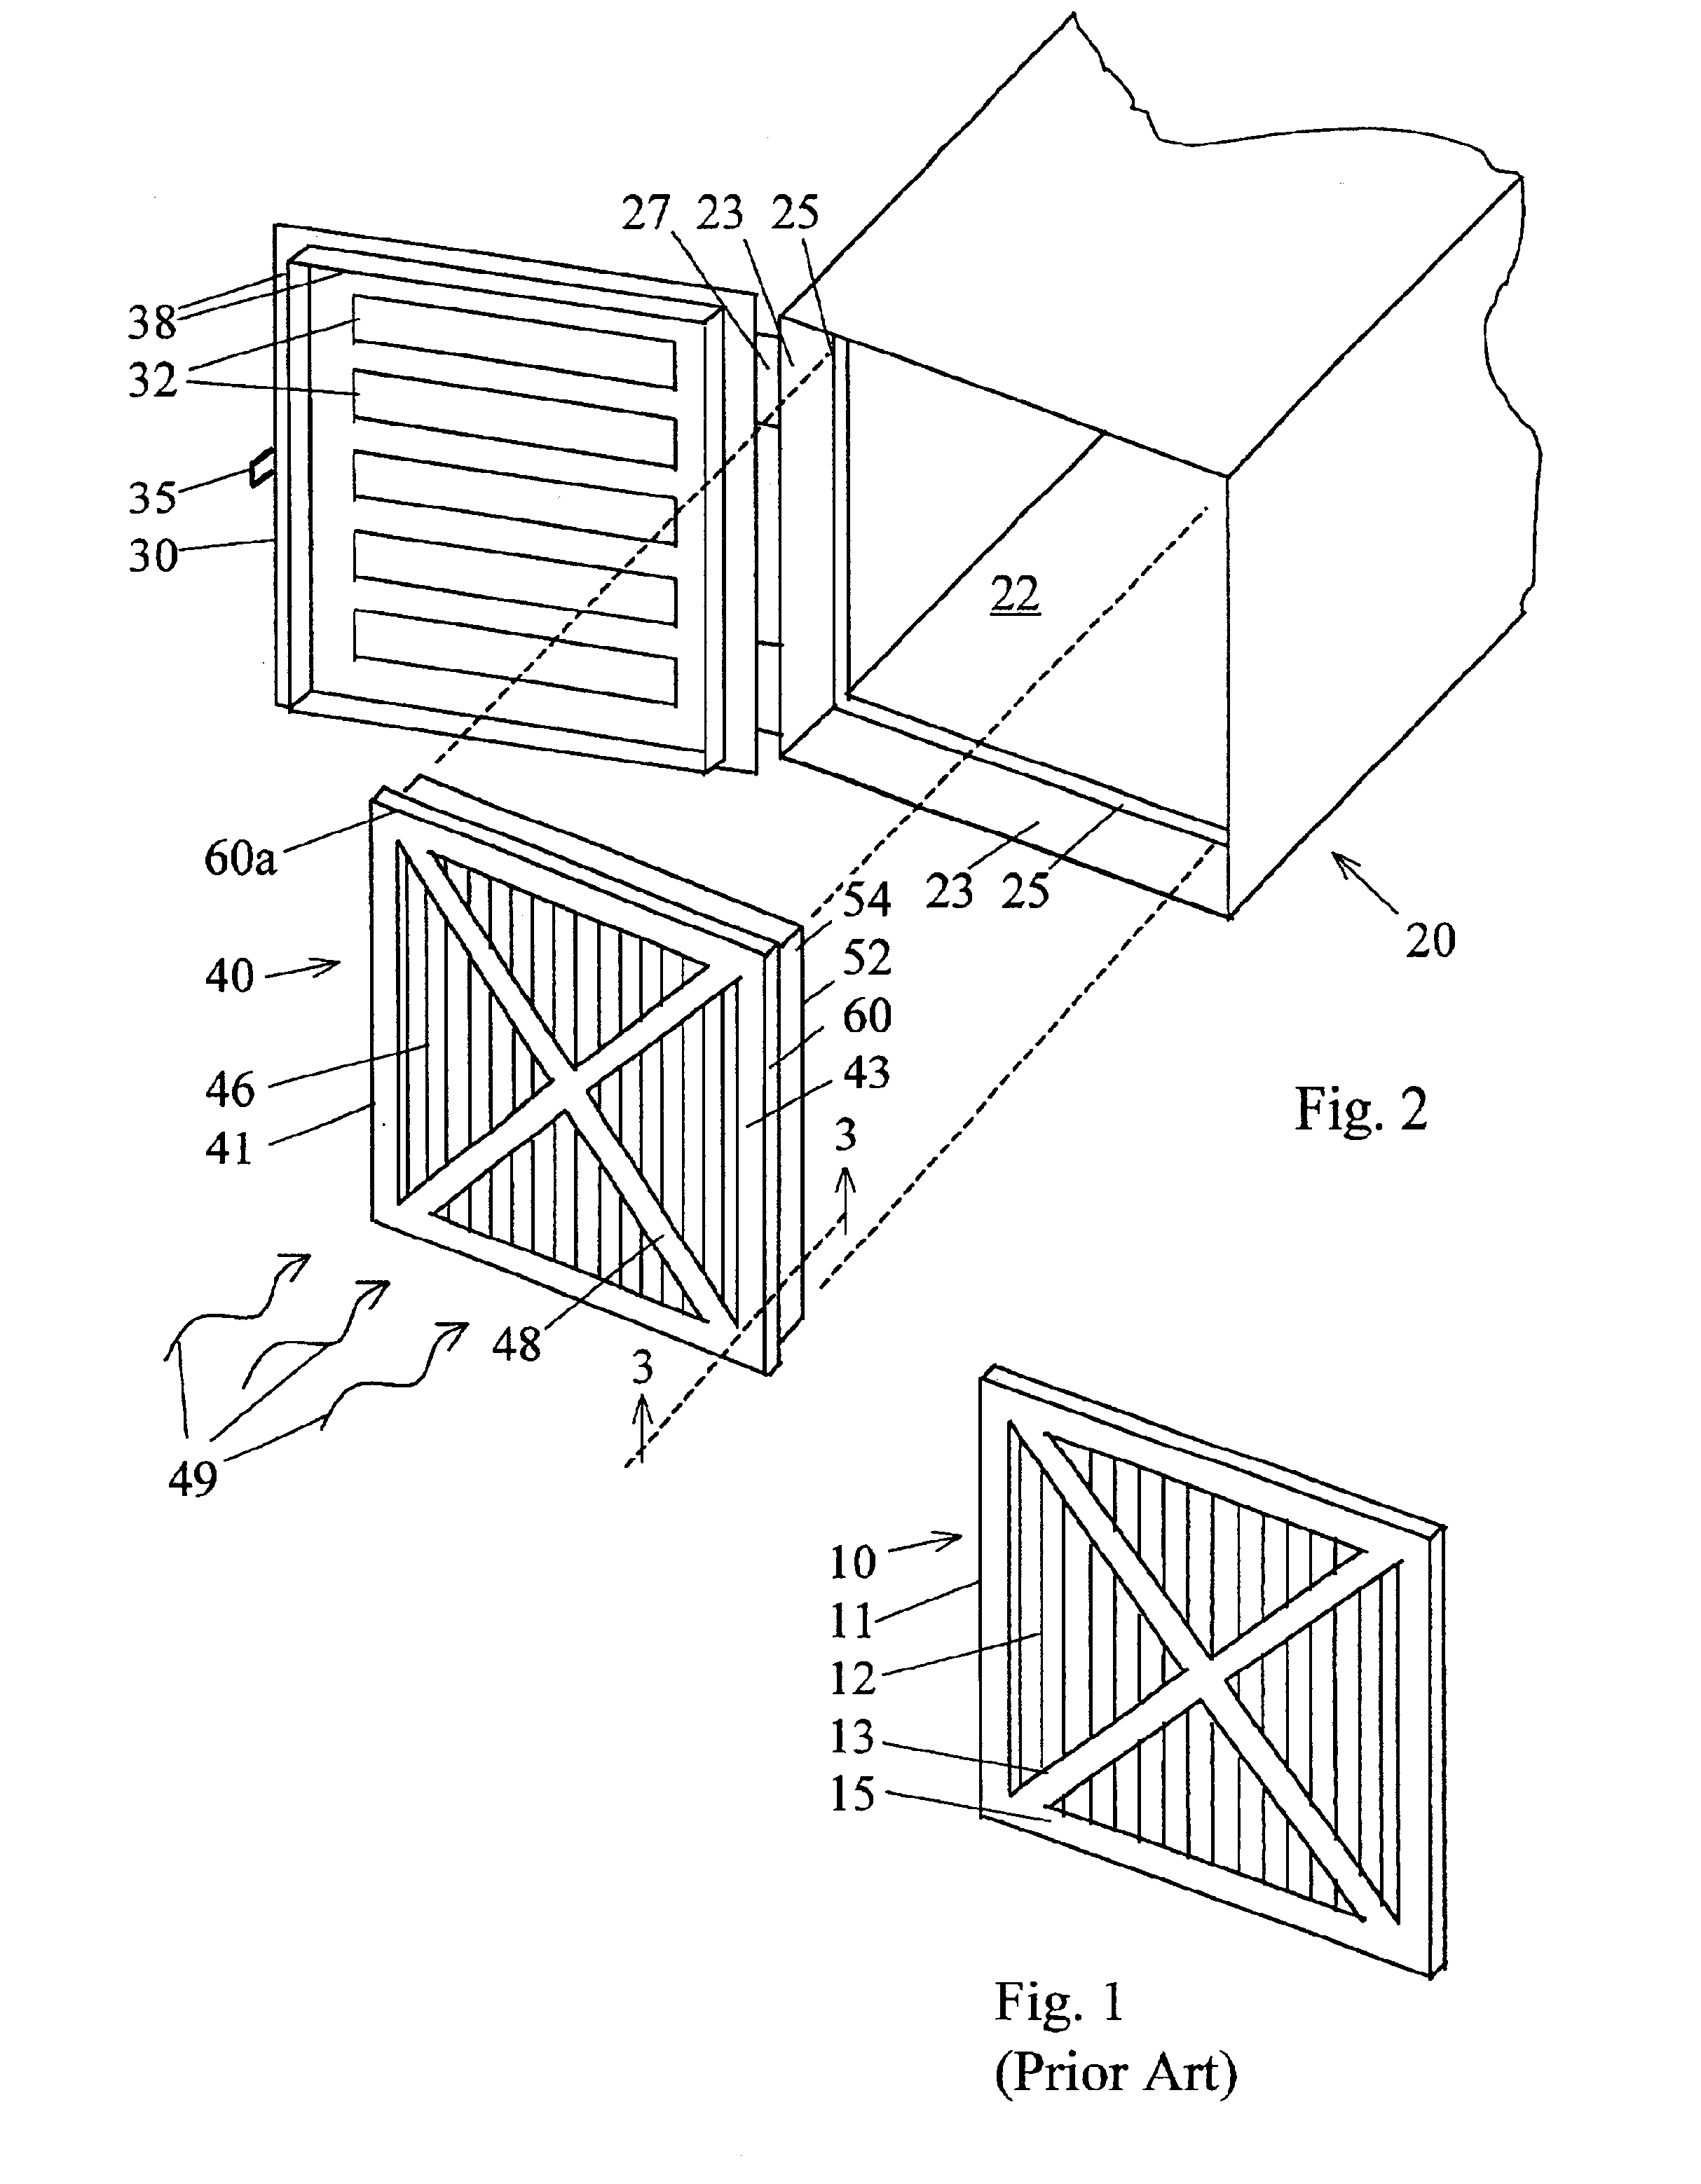 Deep filter element suitable for replacing a shallow filter element and having a support frame made from thin stock